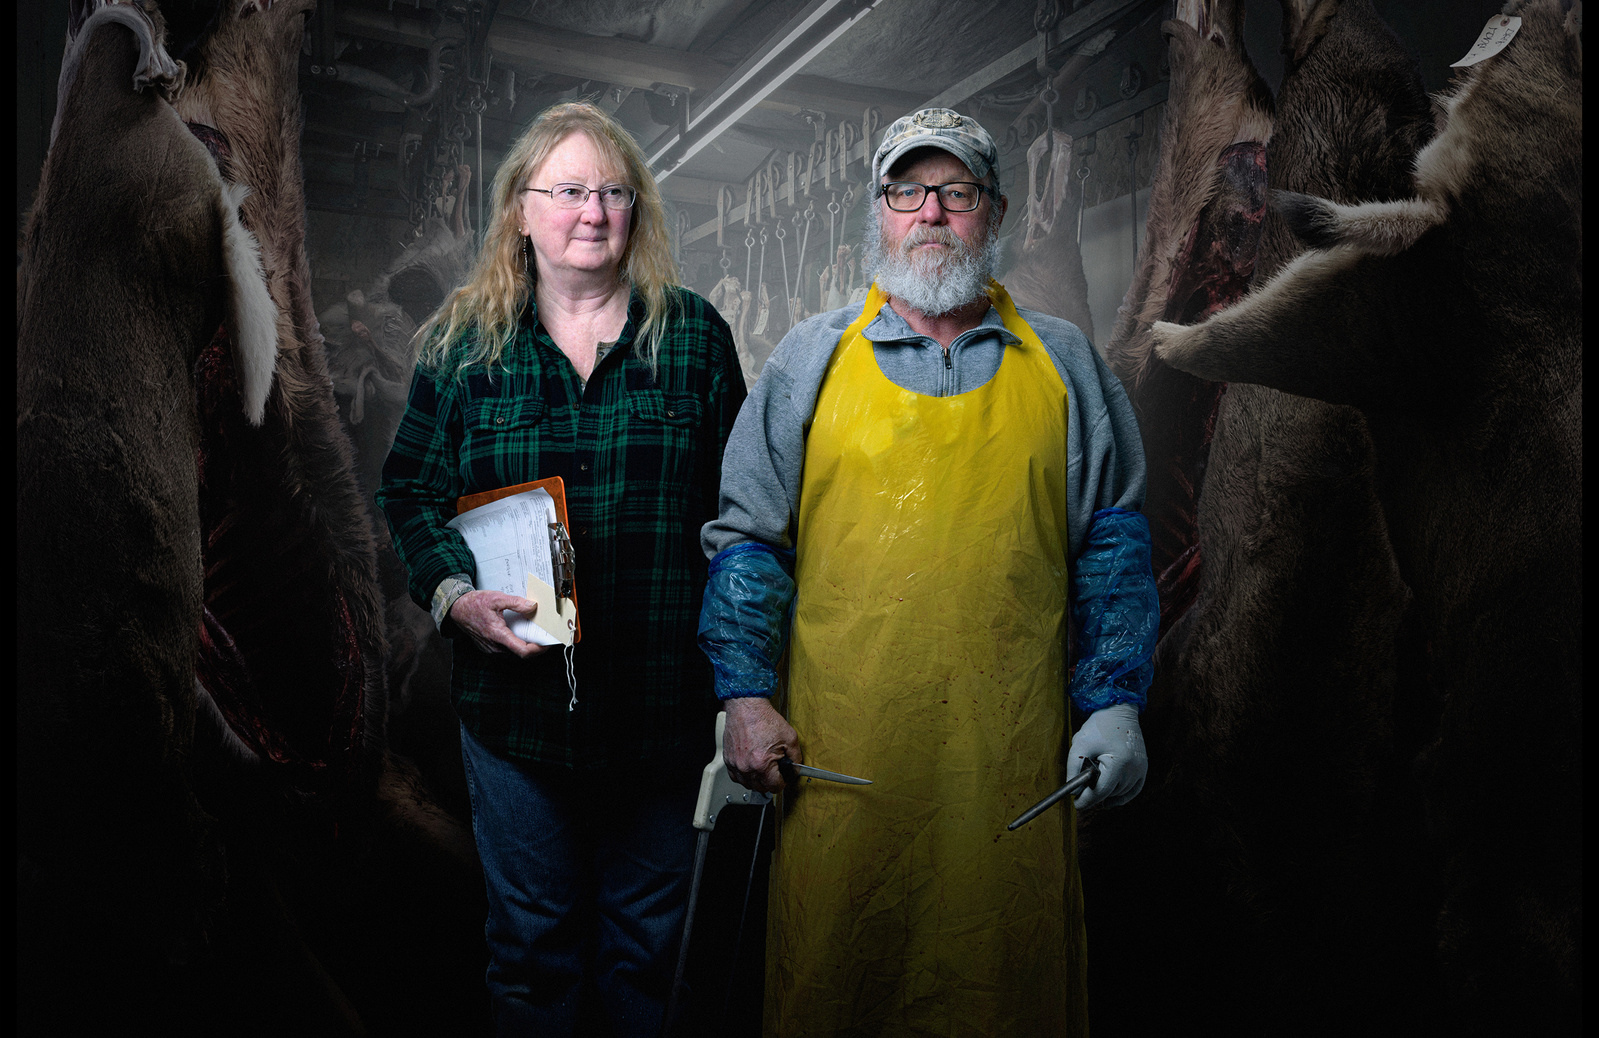 A portrait of Buzz and Patti Jones of Yellowstone Game Processing pose in front of elk and deer aging in a meat locker.